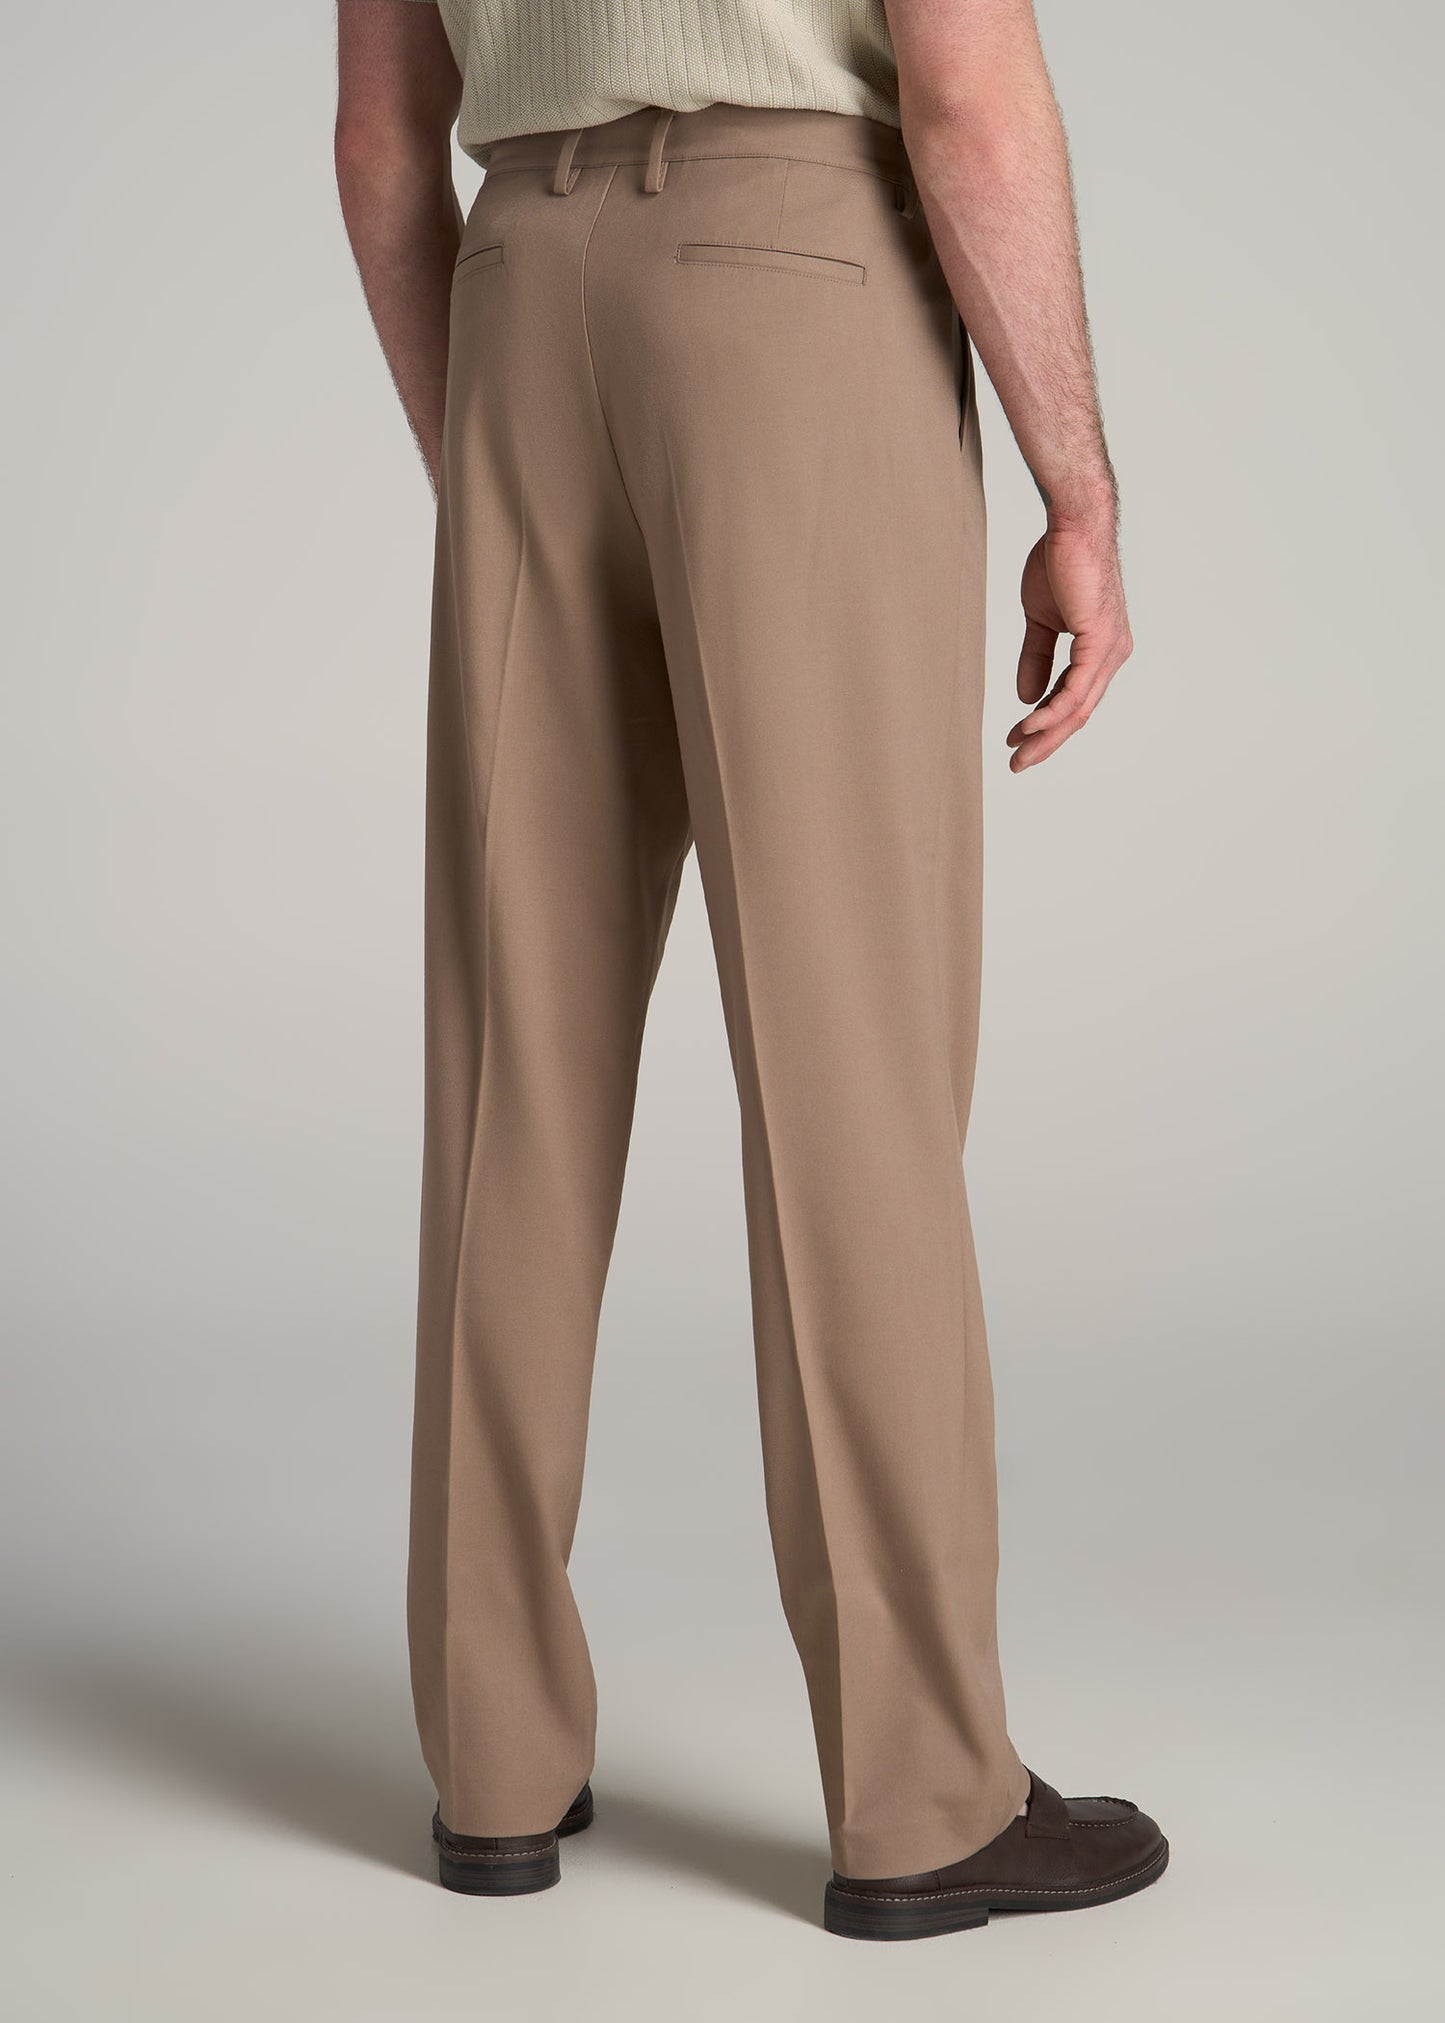 Tall Men's Relaxed Tapered Pleated Trouser